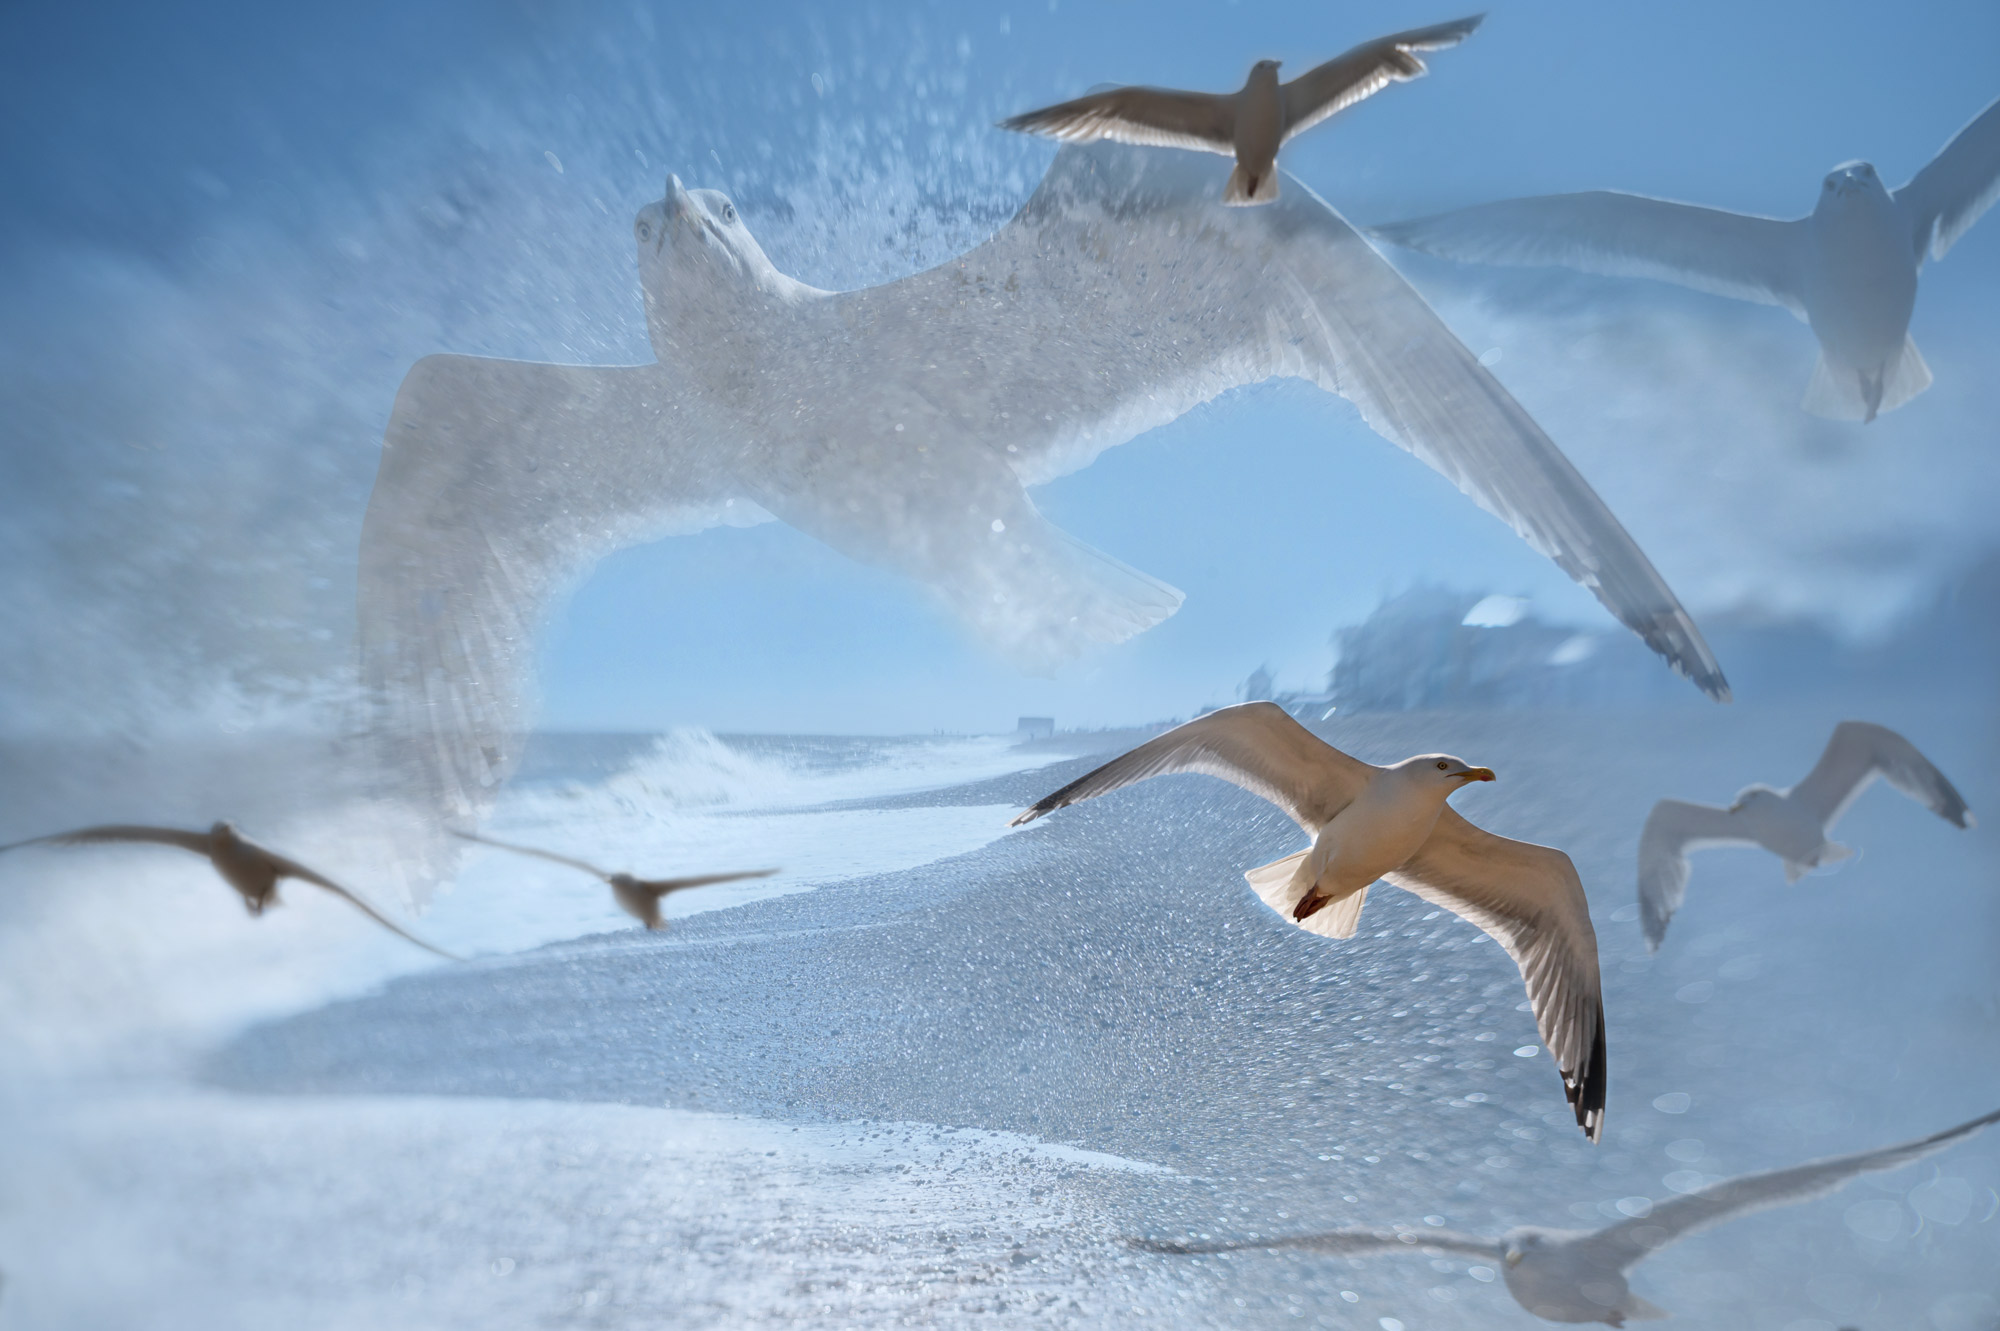 Overcoming imposter syndrome - double exposure of seagulls